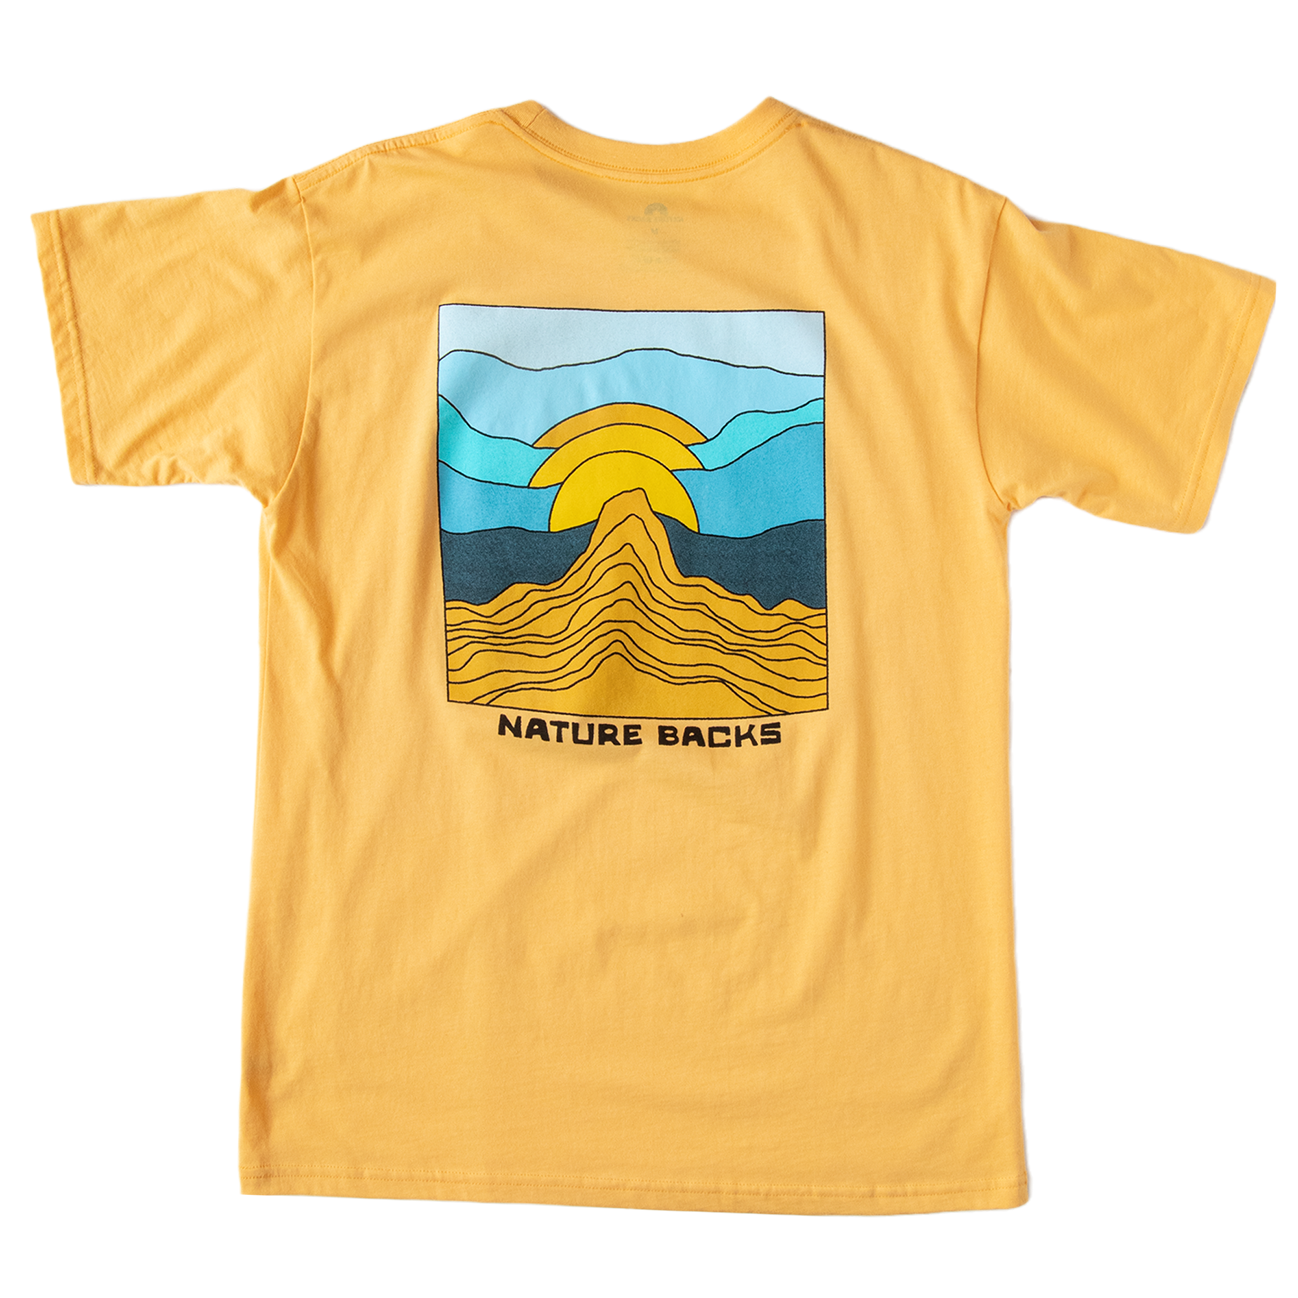 Nature Backs Limited Edition Short Sleeve 100% Organic Cotton T-Shirt | Limited Gradient Citrus Short Sleeve made with Eco-Friendly Fibers Sustainably made in the USA 